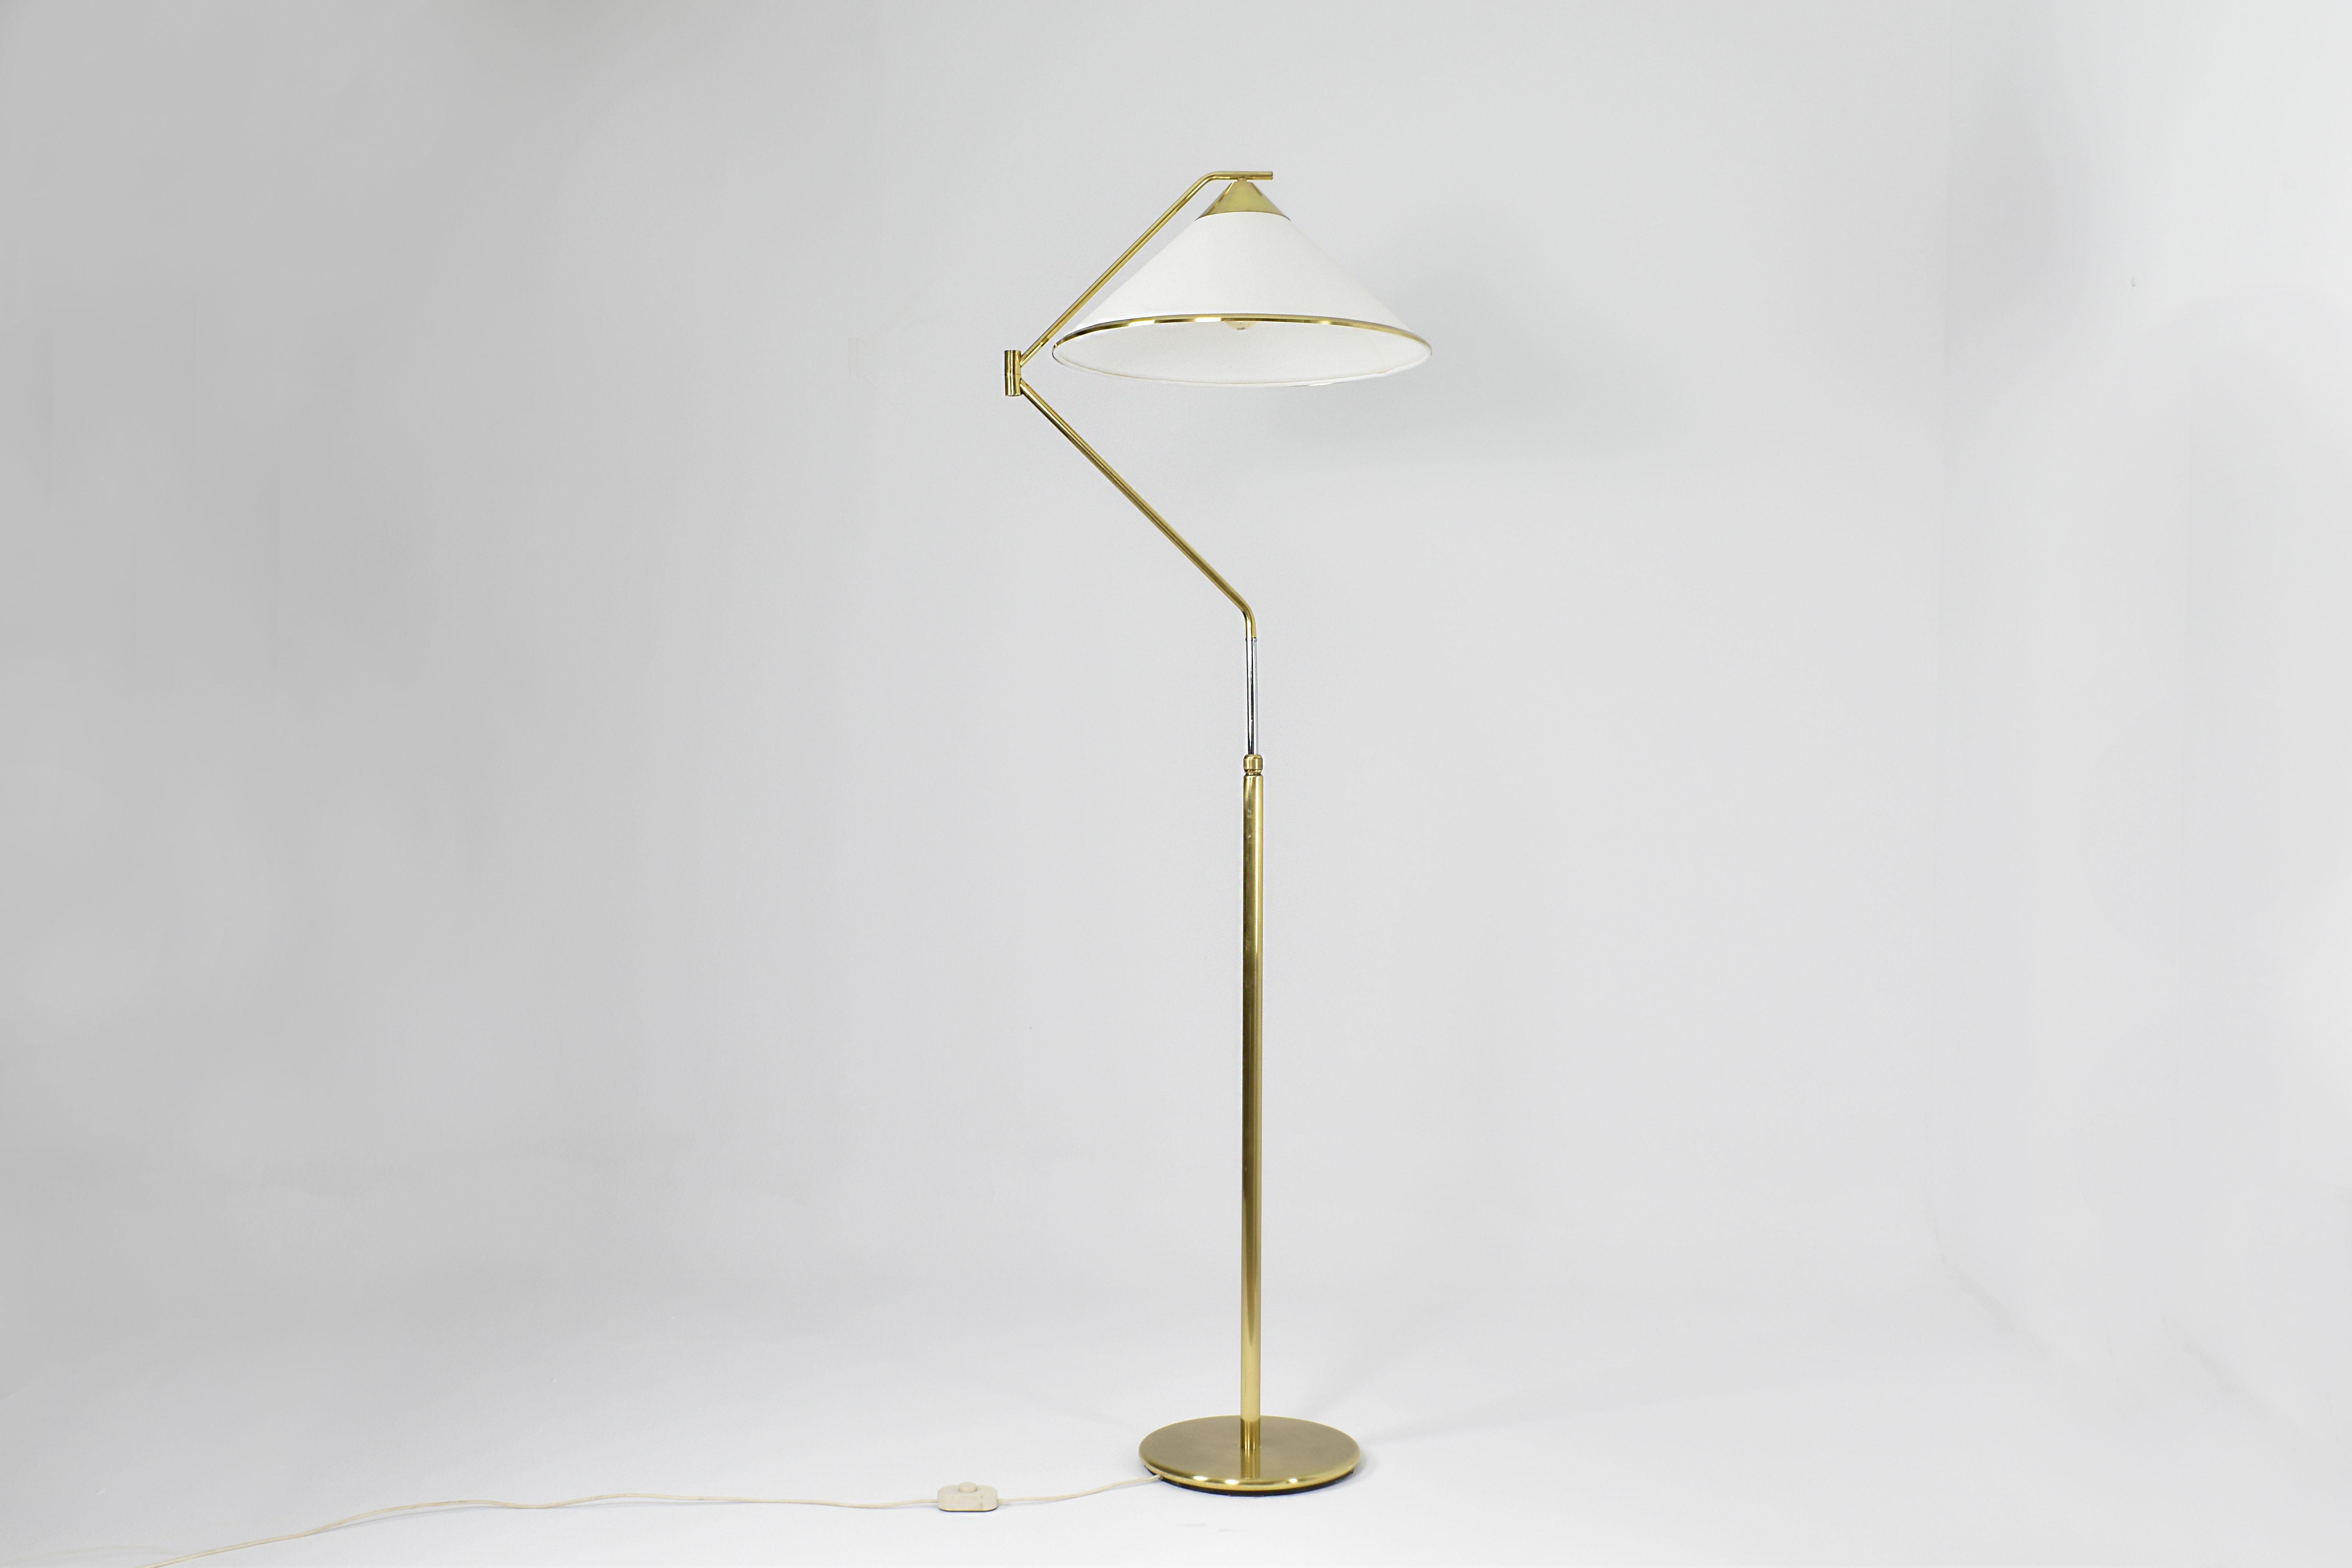 A meticulously restored elegantly crafted brass Italian floor lamp by Arredoluce Monza from the 1940s was restored with a new fabric shade identical to the original. 
The wiring is original and professionally checked. 

Arredoluce Monza was an